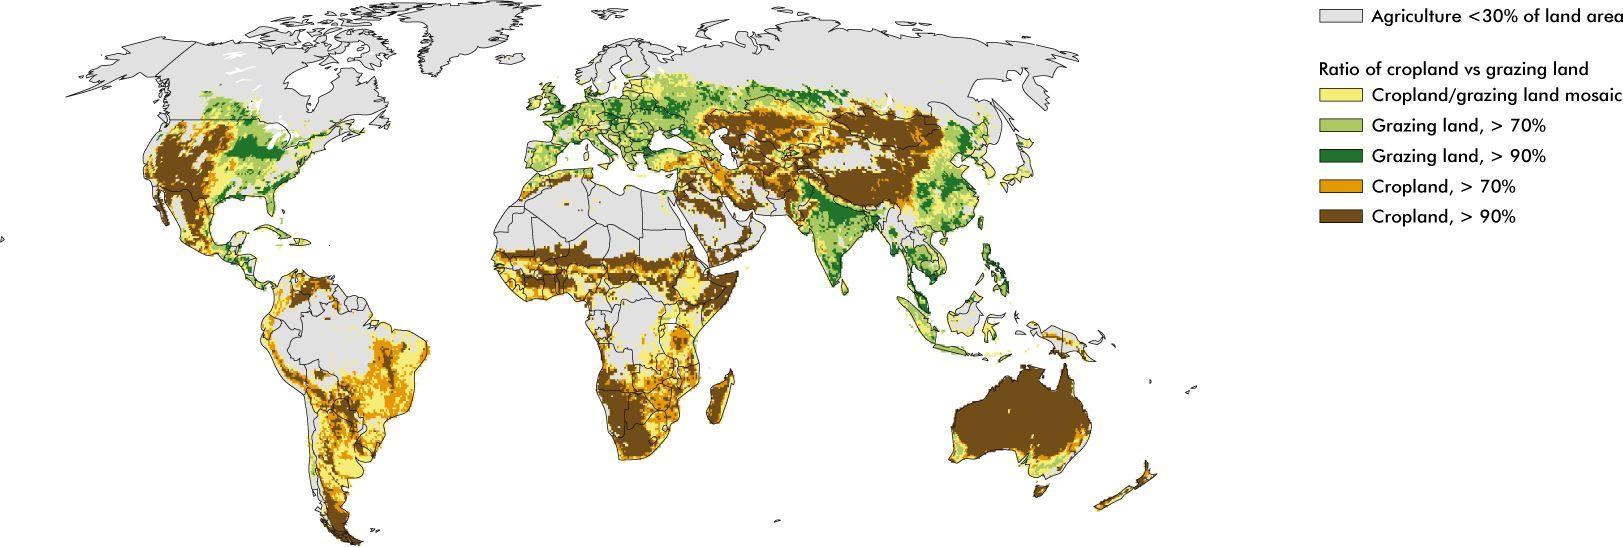 Agriculture land use distribution - croplands and pasture land